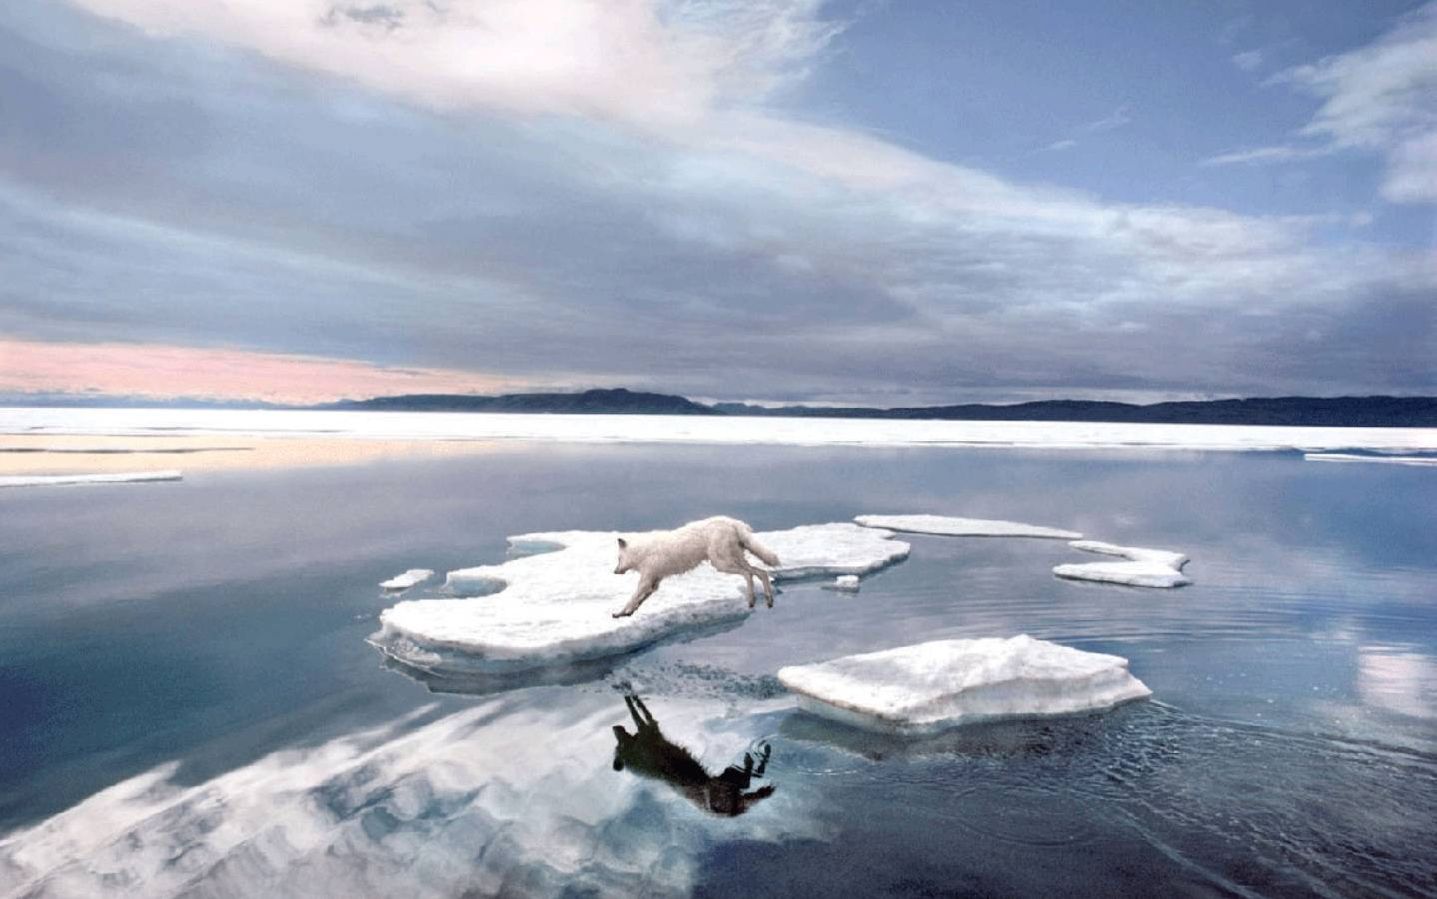 A leaping Arctic wolf jumping between ice floes is considered to be one of the most important wildlife photos ever taken. Photo by Jim Brandenburg.